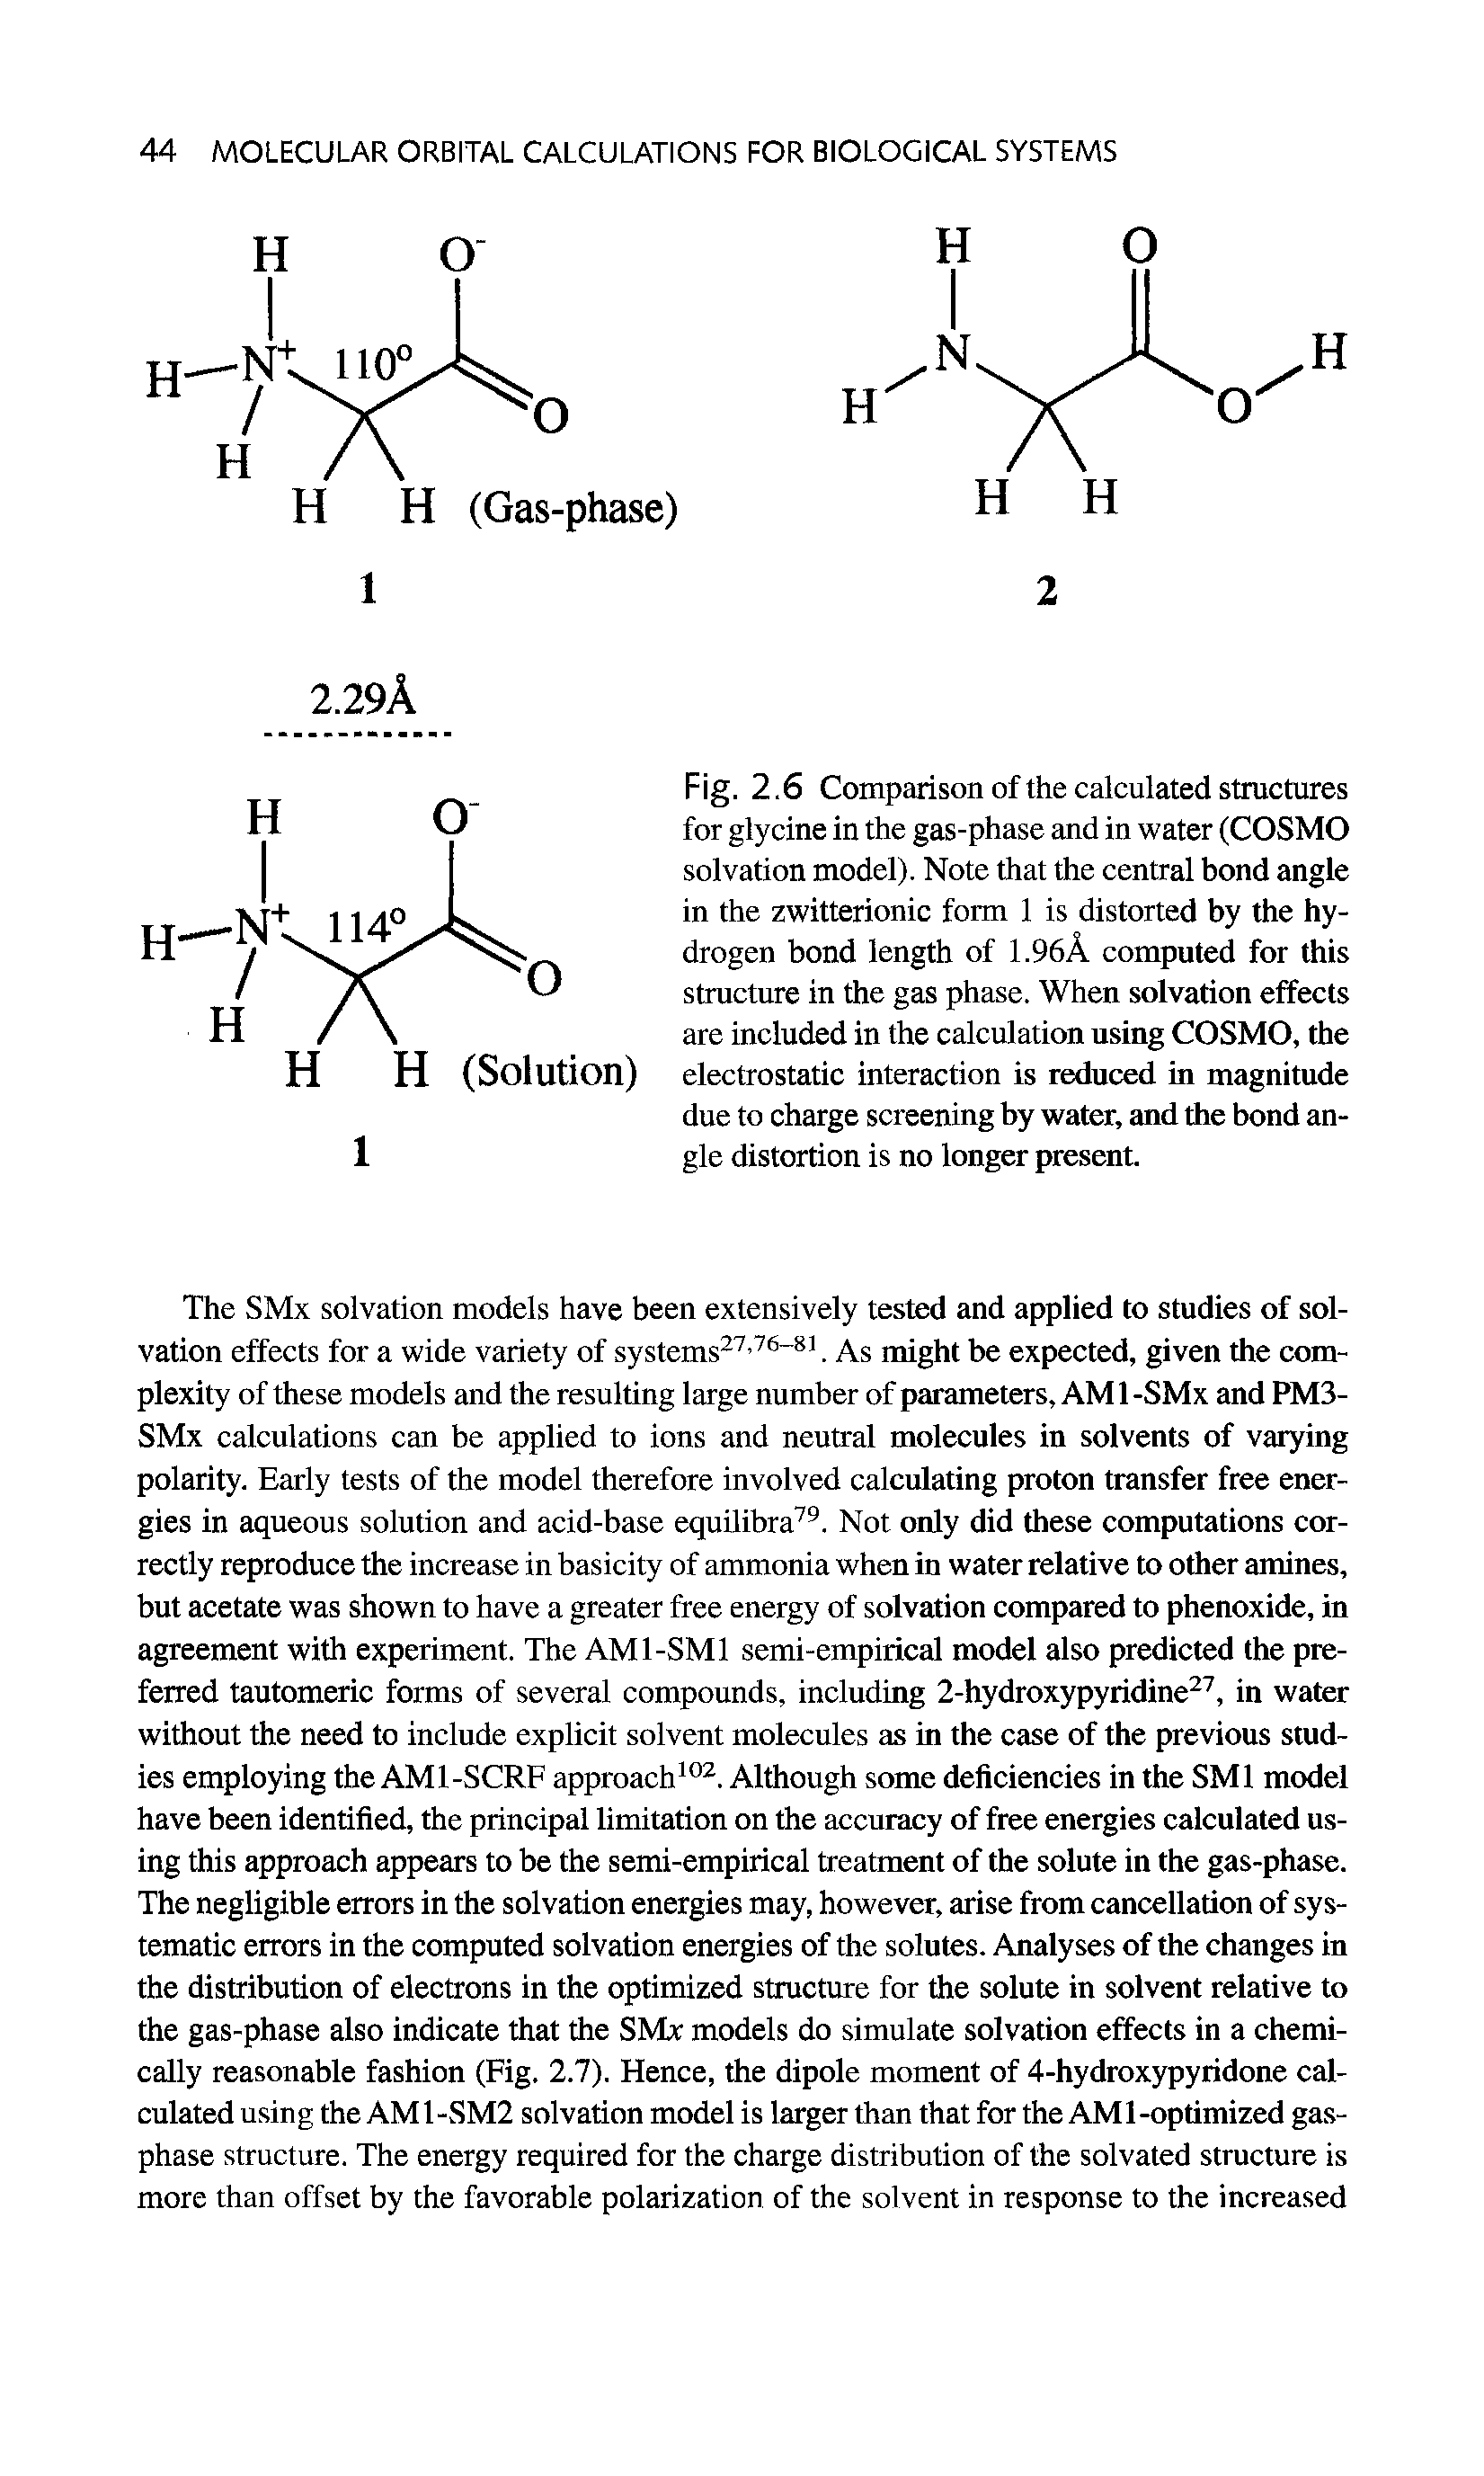 Fig. 2.6 Comparison of the calculated structures for glycine in the gas-phase and in water (COSMO solvation model). Note that the central bond angle in the zwitterionic form 1 is distorted by the hydrogen bond length of 1.96A computed for this structure in the gas phase. When solvation effects are included in the calculation using COSMO, the electrostatic interaction is reduced in magnitude due to charge screening by water, and the bond angle distortion is no longer present.